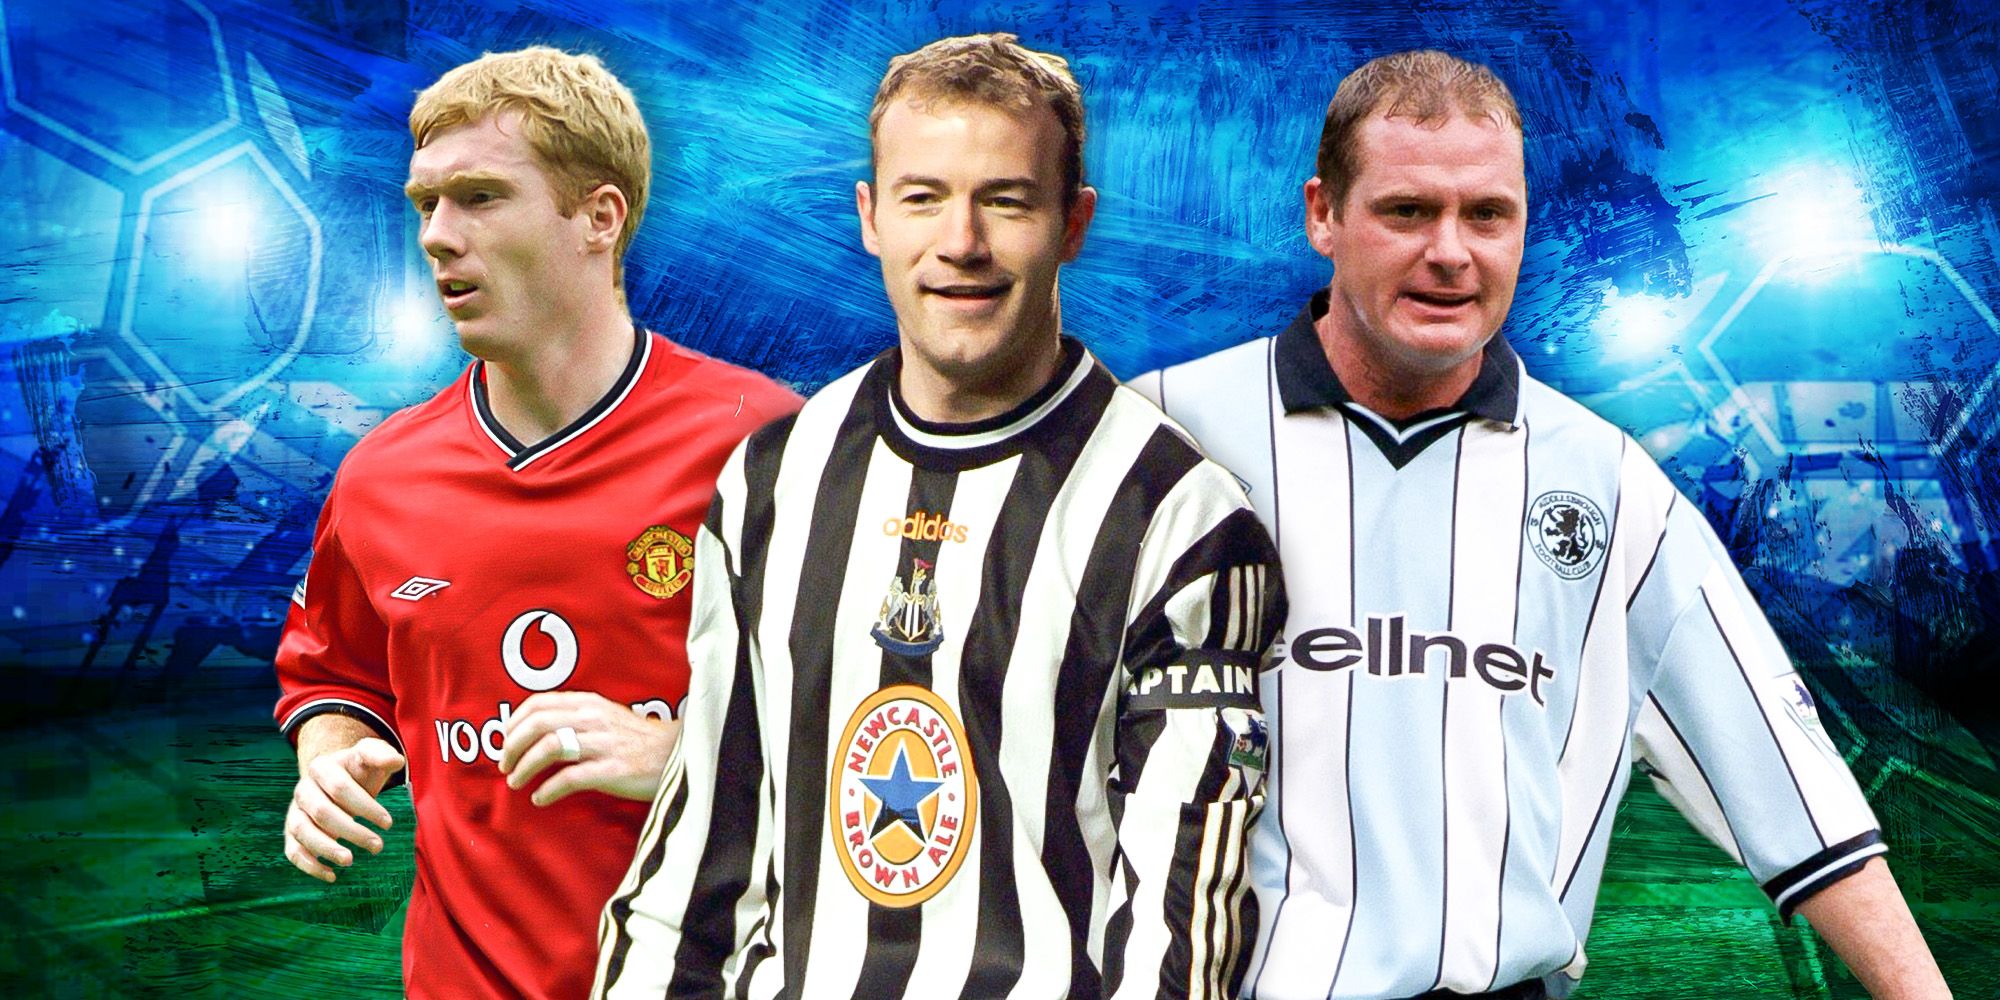 EPL_Shearer's Dream Alan Shearer's in Newcastle United kit with Paul Gascoigne and Paul Scholes on either side